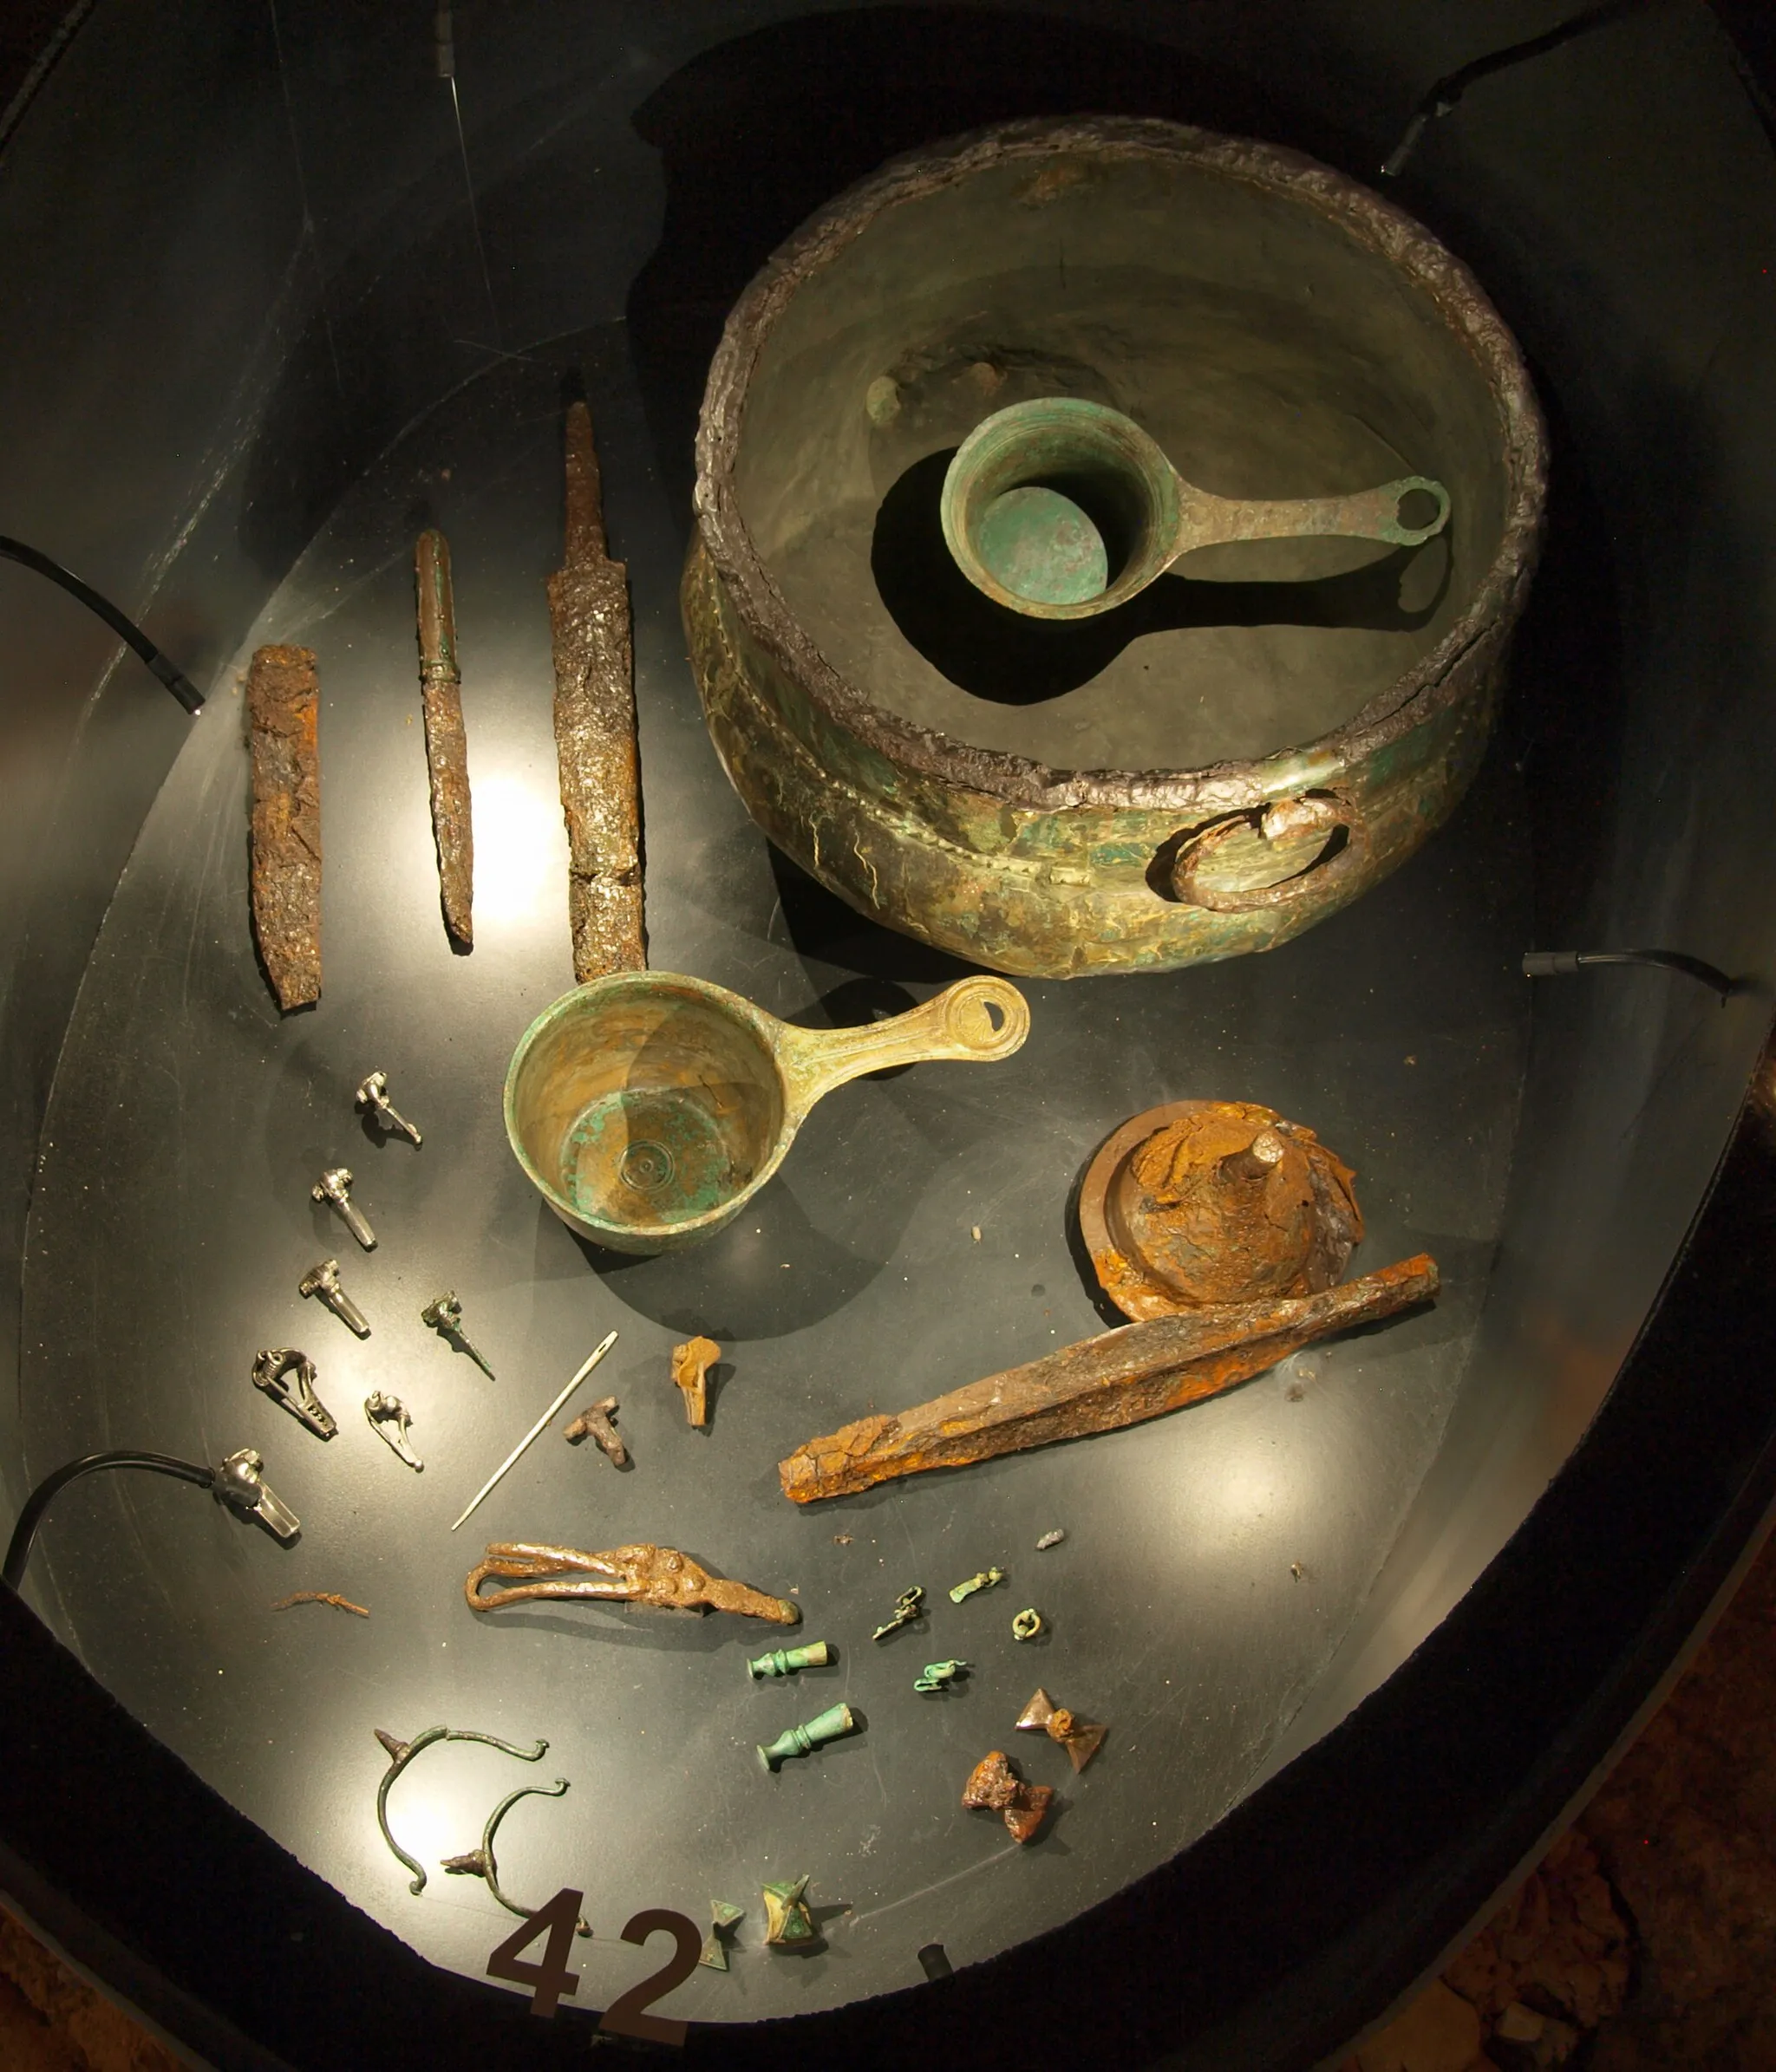 Photo showing: Items from the Lombard warrior's grave Putensen 150, dating to circa 50 A.D., in the community Salzhausen, District of Harburg, Germany. It consists of a Roman bronze cauldron, 2 Roman casseroles (patherae), sword, dagger, knife, 8 fibulae, silver pin, shield boss, lance point, belt buckle, 2 drinking horn fittings, 3 pairs of spurs. Photographed at Archaeological Museum Hamburg, Germany.